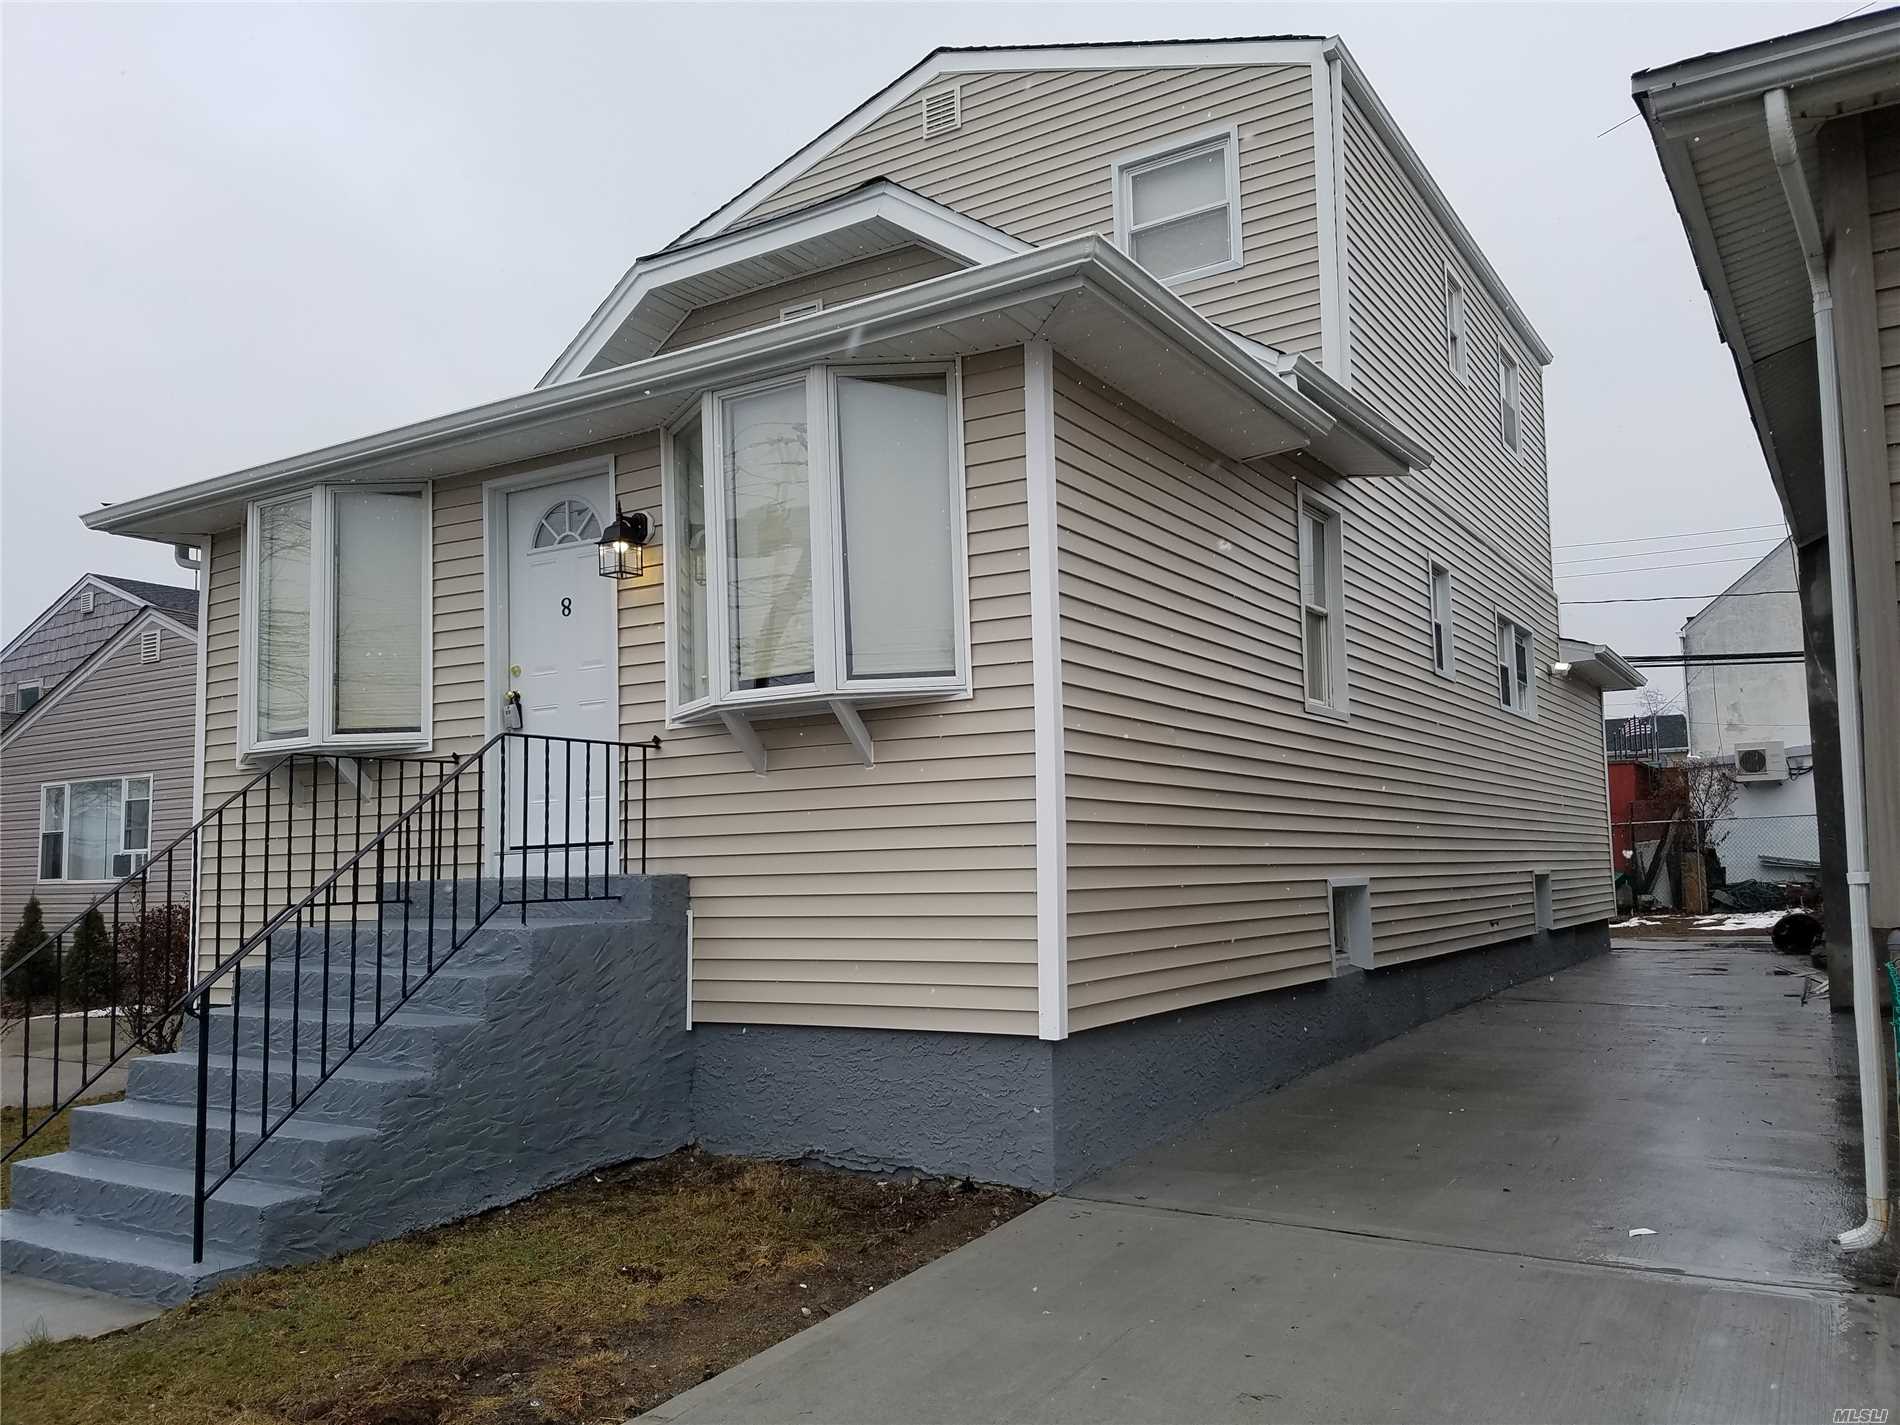 Totally Renovated 3 Bedrooms, 2 Full Bathrooms Colonial, All New Stanley Steel Appliances, Walking Distance To Train Station, Low Taxes, Great Location